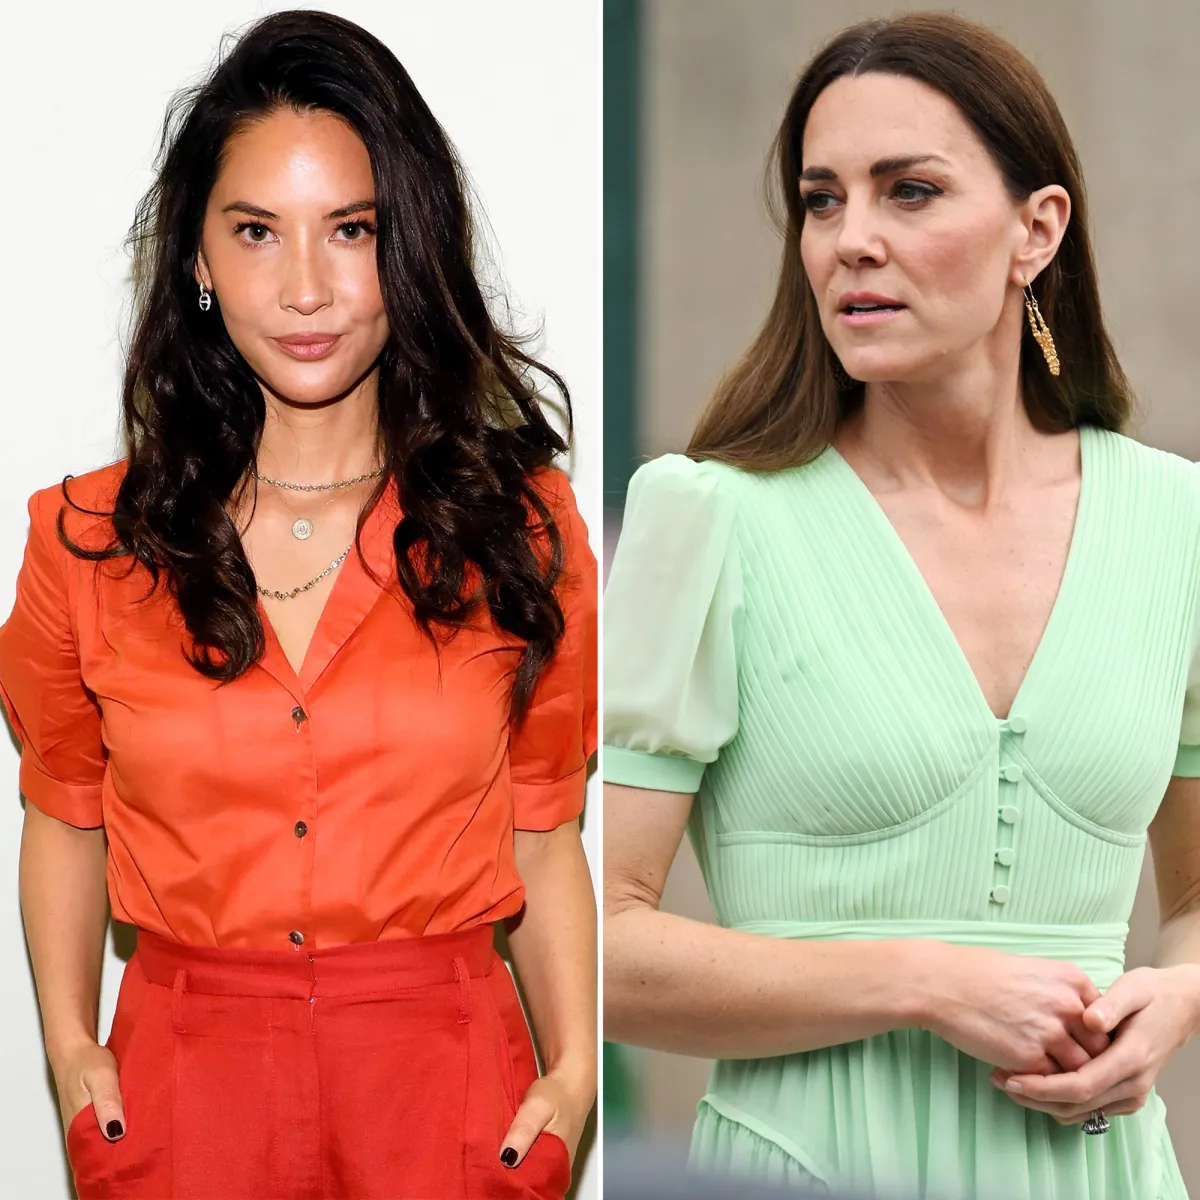 Olivia Munn Lauds Kate Middleton for Her 'Grace and Determination' Amid Their Respective Cancer Treatment Journey